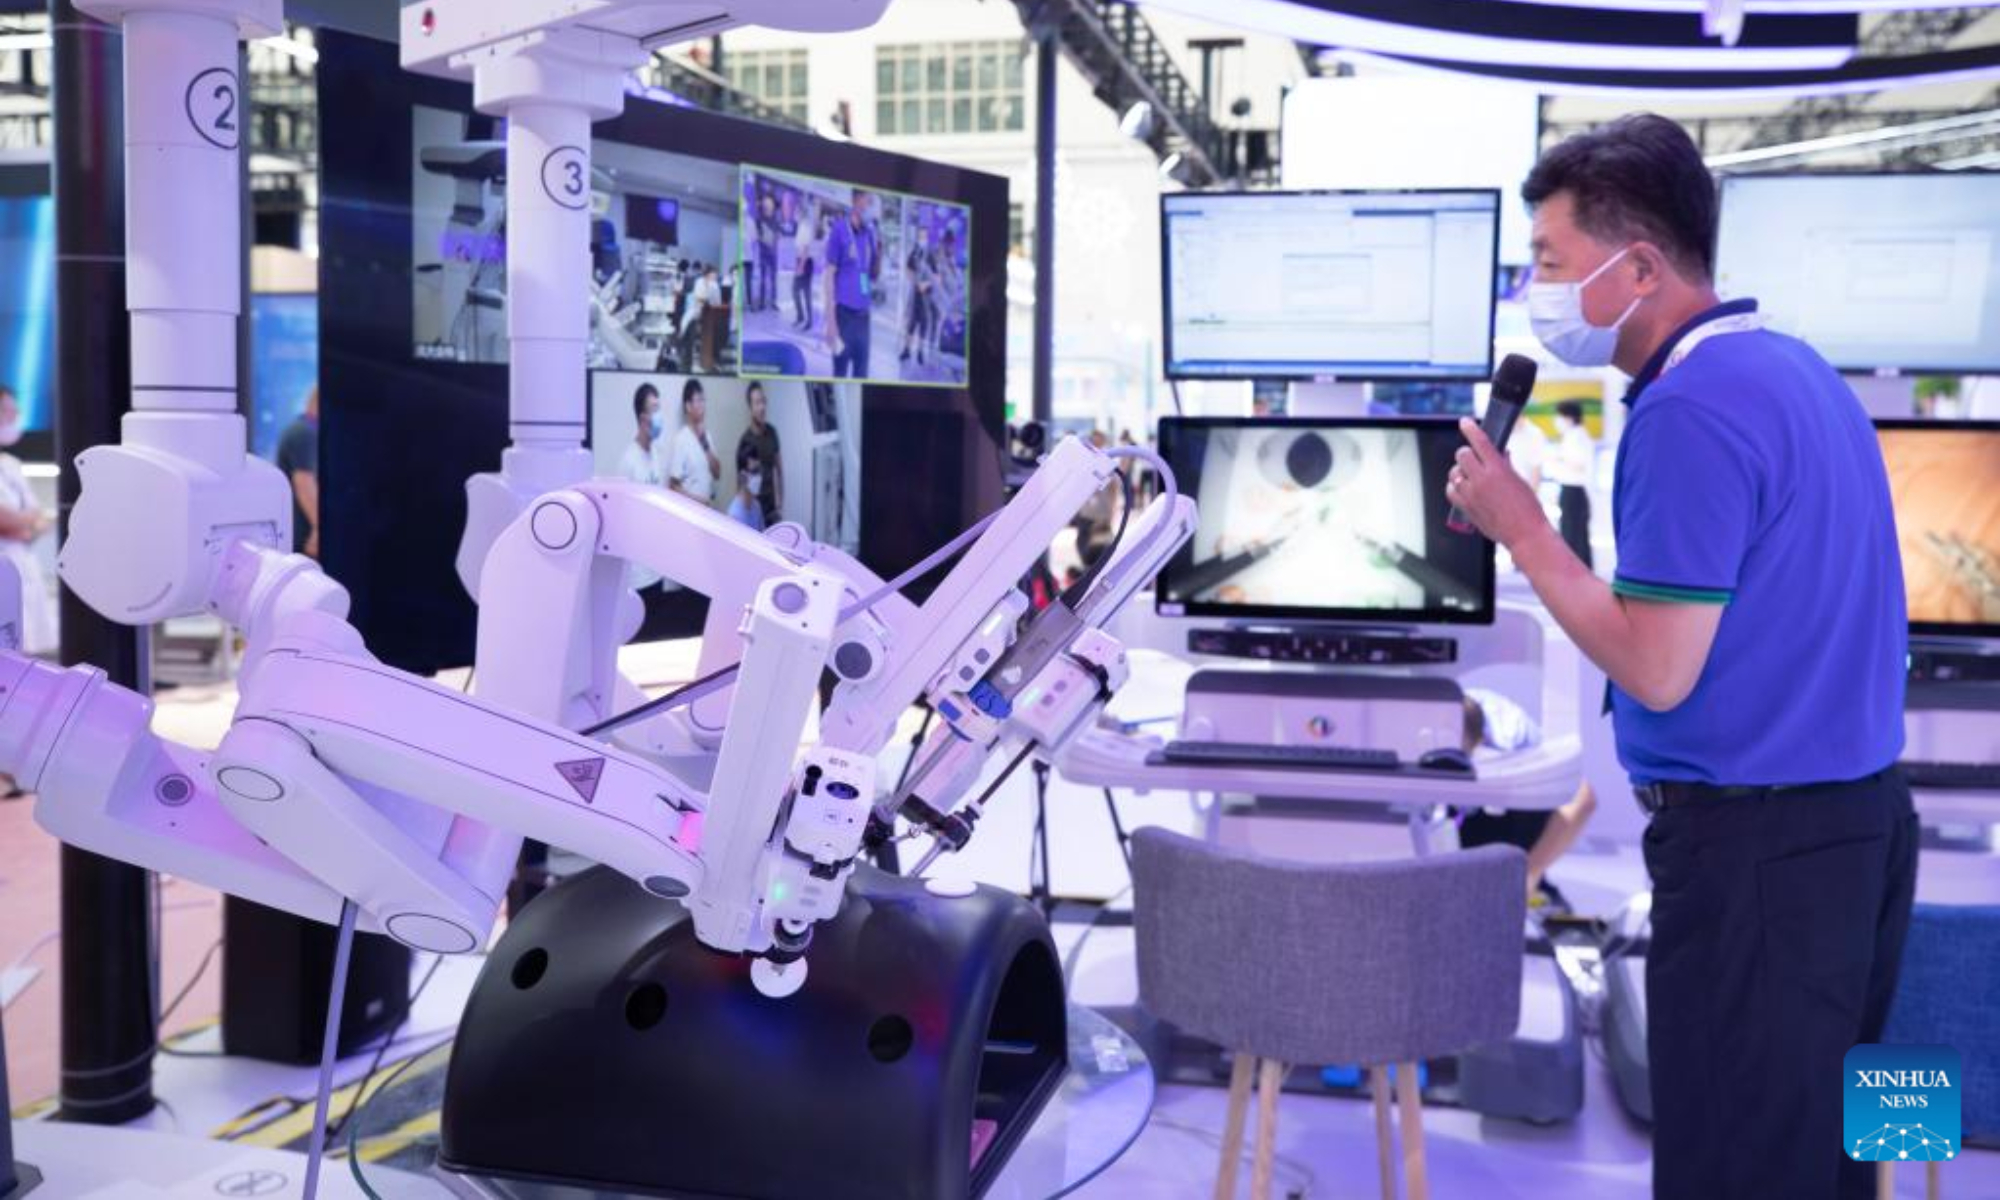 A staff member tests devices at an exhibition booth during a media preview of the 2022 World 5G Convention in Harbin, capital of northeast China's Heilongjiang Province, Aug 9, 2022. Photo:Xinhua